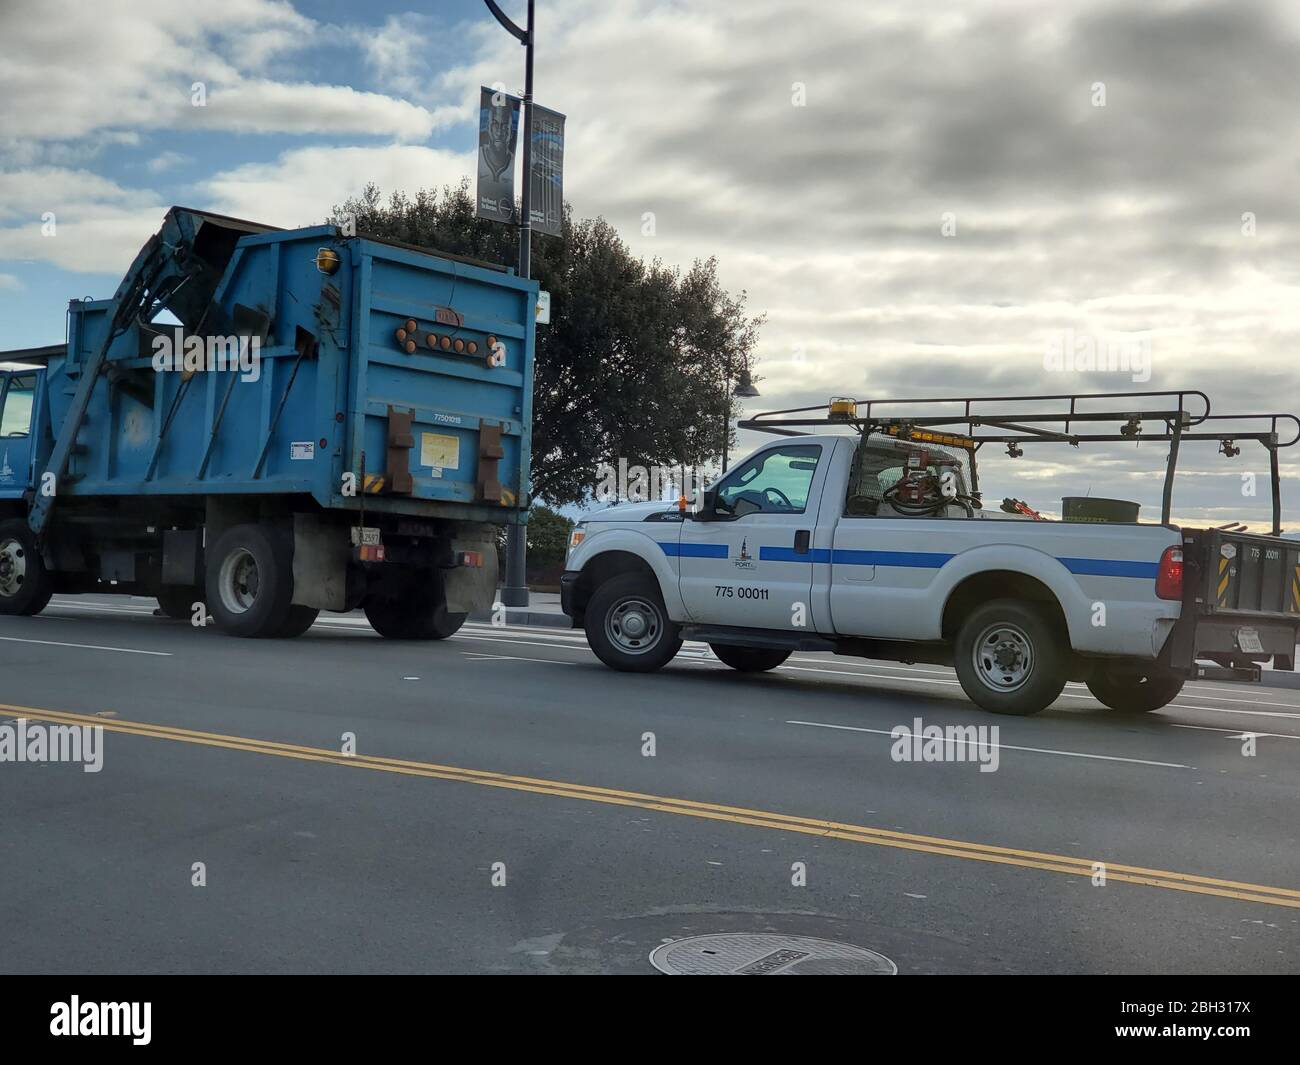 Trash service, deemed essential, continued during an outbreak of the COVID-19 coronavirus in San Francisco, California, March 30, 2020. () Stock Photo